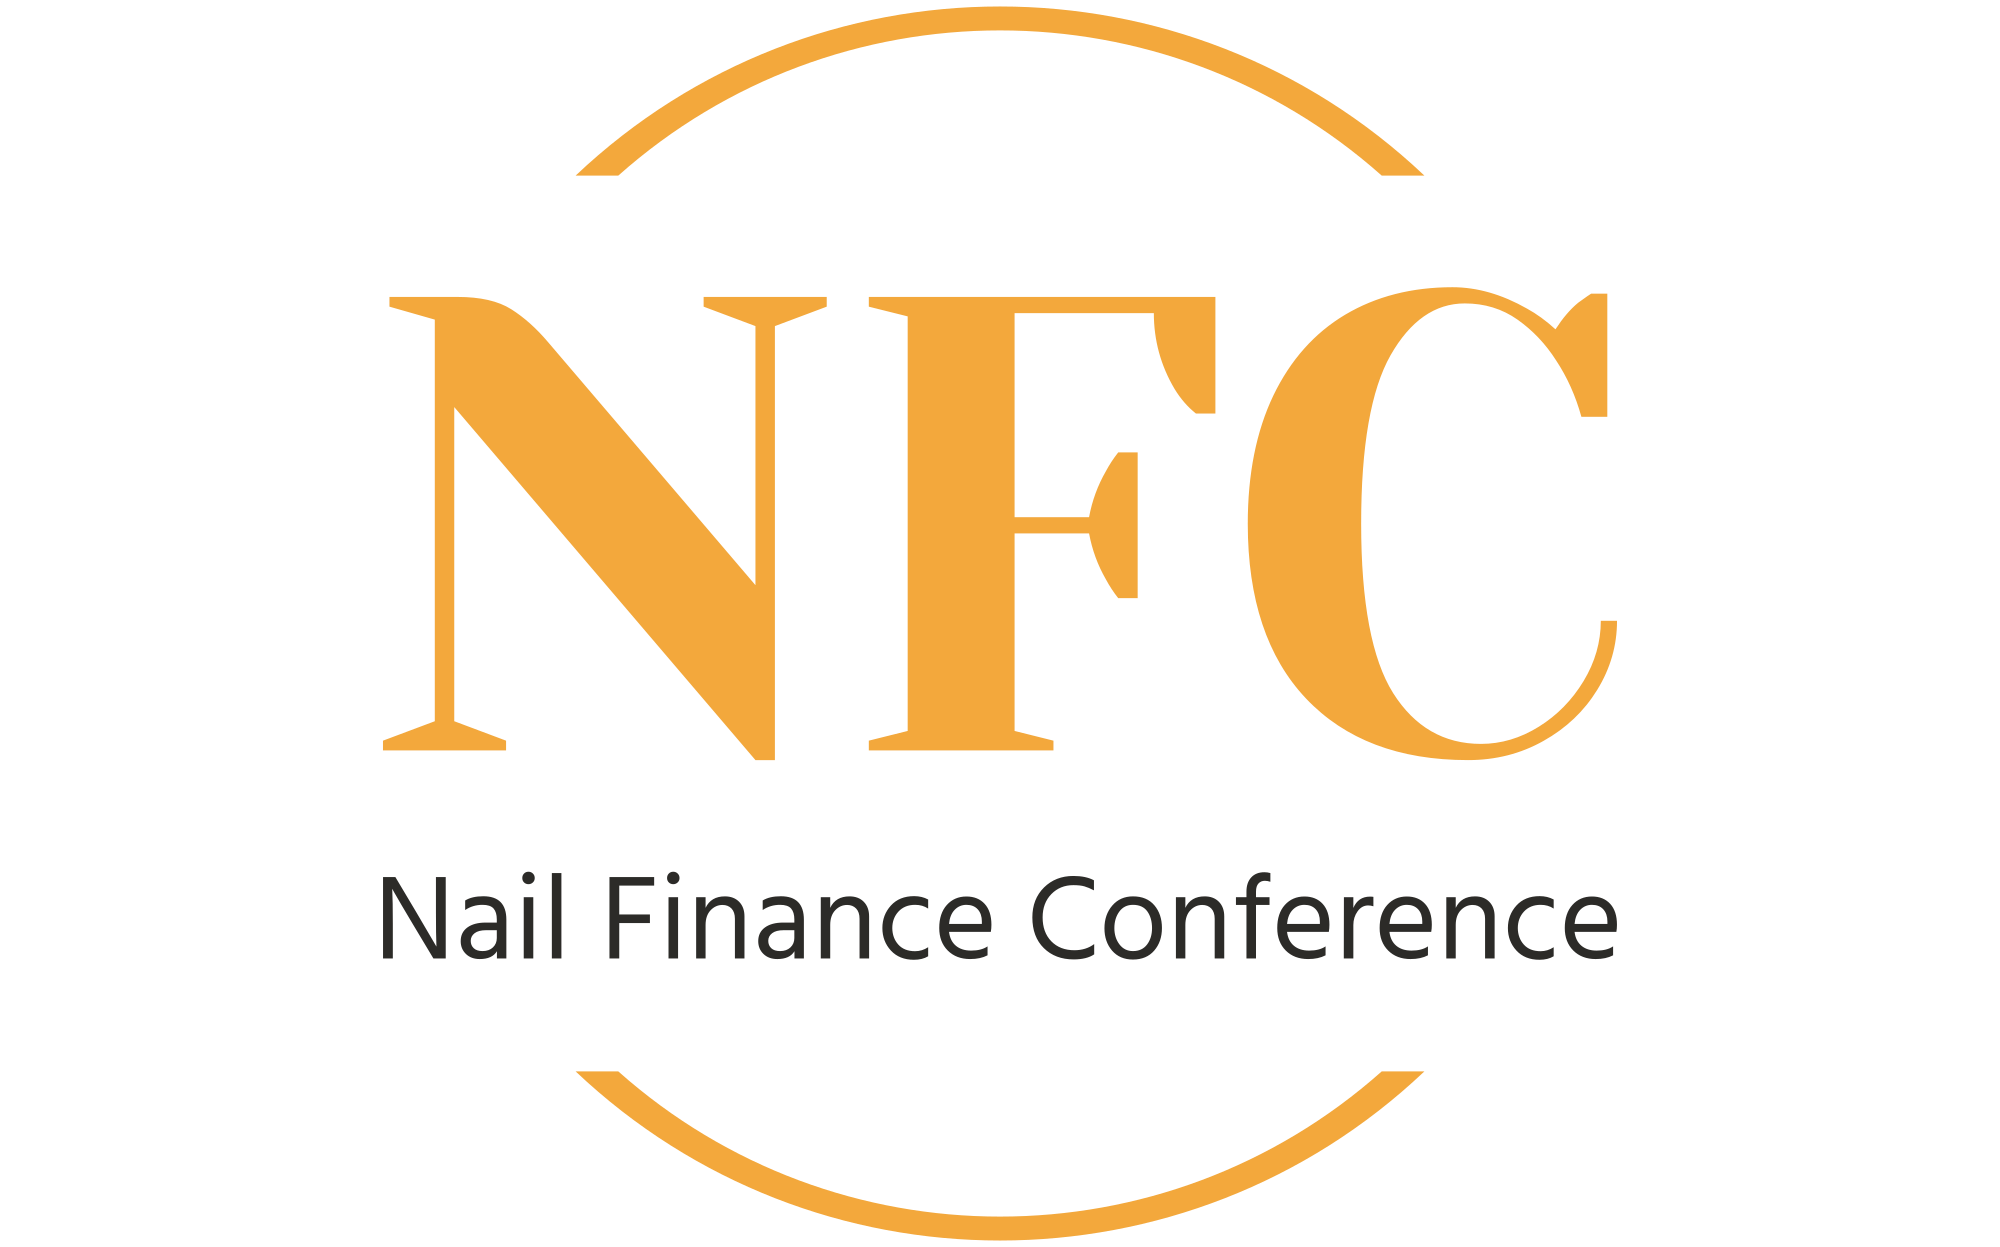 Nail Finance Conference